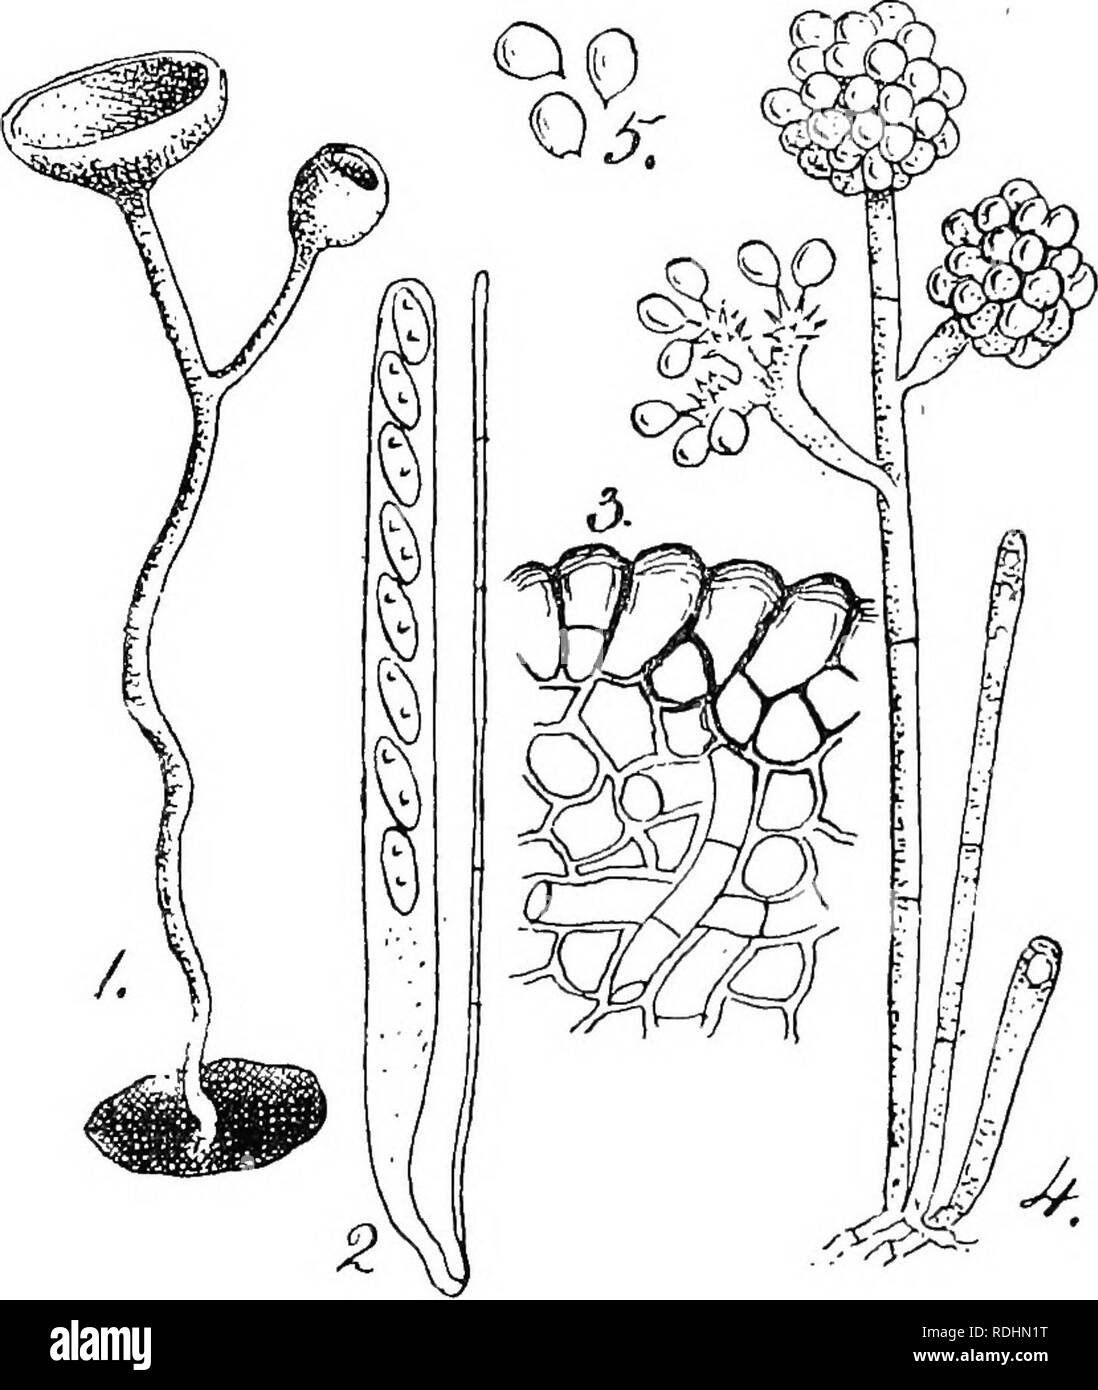 . British fungus-flora. A classified text-book of mycology. Fungi. 284 FUNG us-FLORA. Sclerotinia bulborum. Eehm, Krypt.-Flora, Disc, p. 819; Sacc, Syll., viii. n. 802; Mass., in Gard. Chron., Aug. 11th, 1894, p, 1894, with fig. Asoophores 1-3 in number, springing from an irregular eclerotium wliich is at first white, then blackish externally.. Fig. 1, Sclerotinia hulhormn, Eehm, x 10 ;âFig. 2, ascua and paraphysis â of same, x 400;âFig. 3, section of portion of a solerotium, x 400;â Fig. 4, Botrytis form of the fungus, x 250;âFig. 5, conidia of Botrytis stage, X 400. 8-12 mm. diameter; ascoph Stock Photo